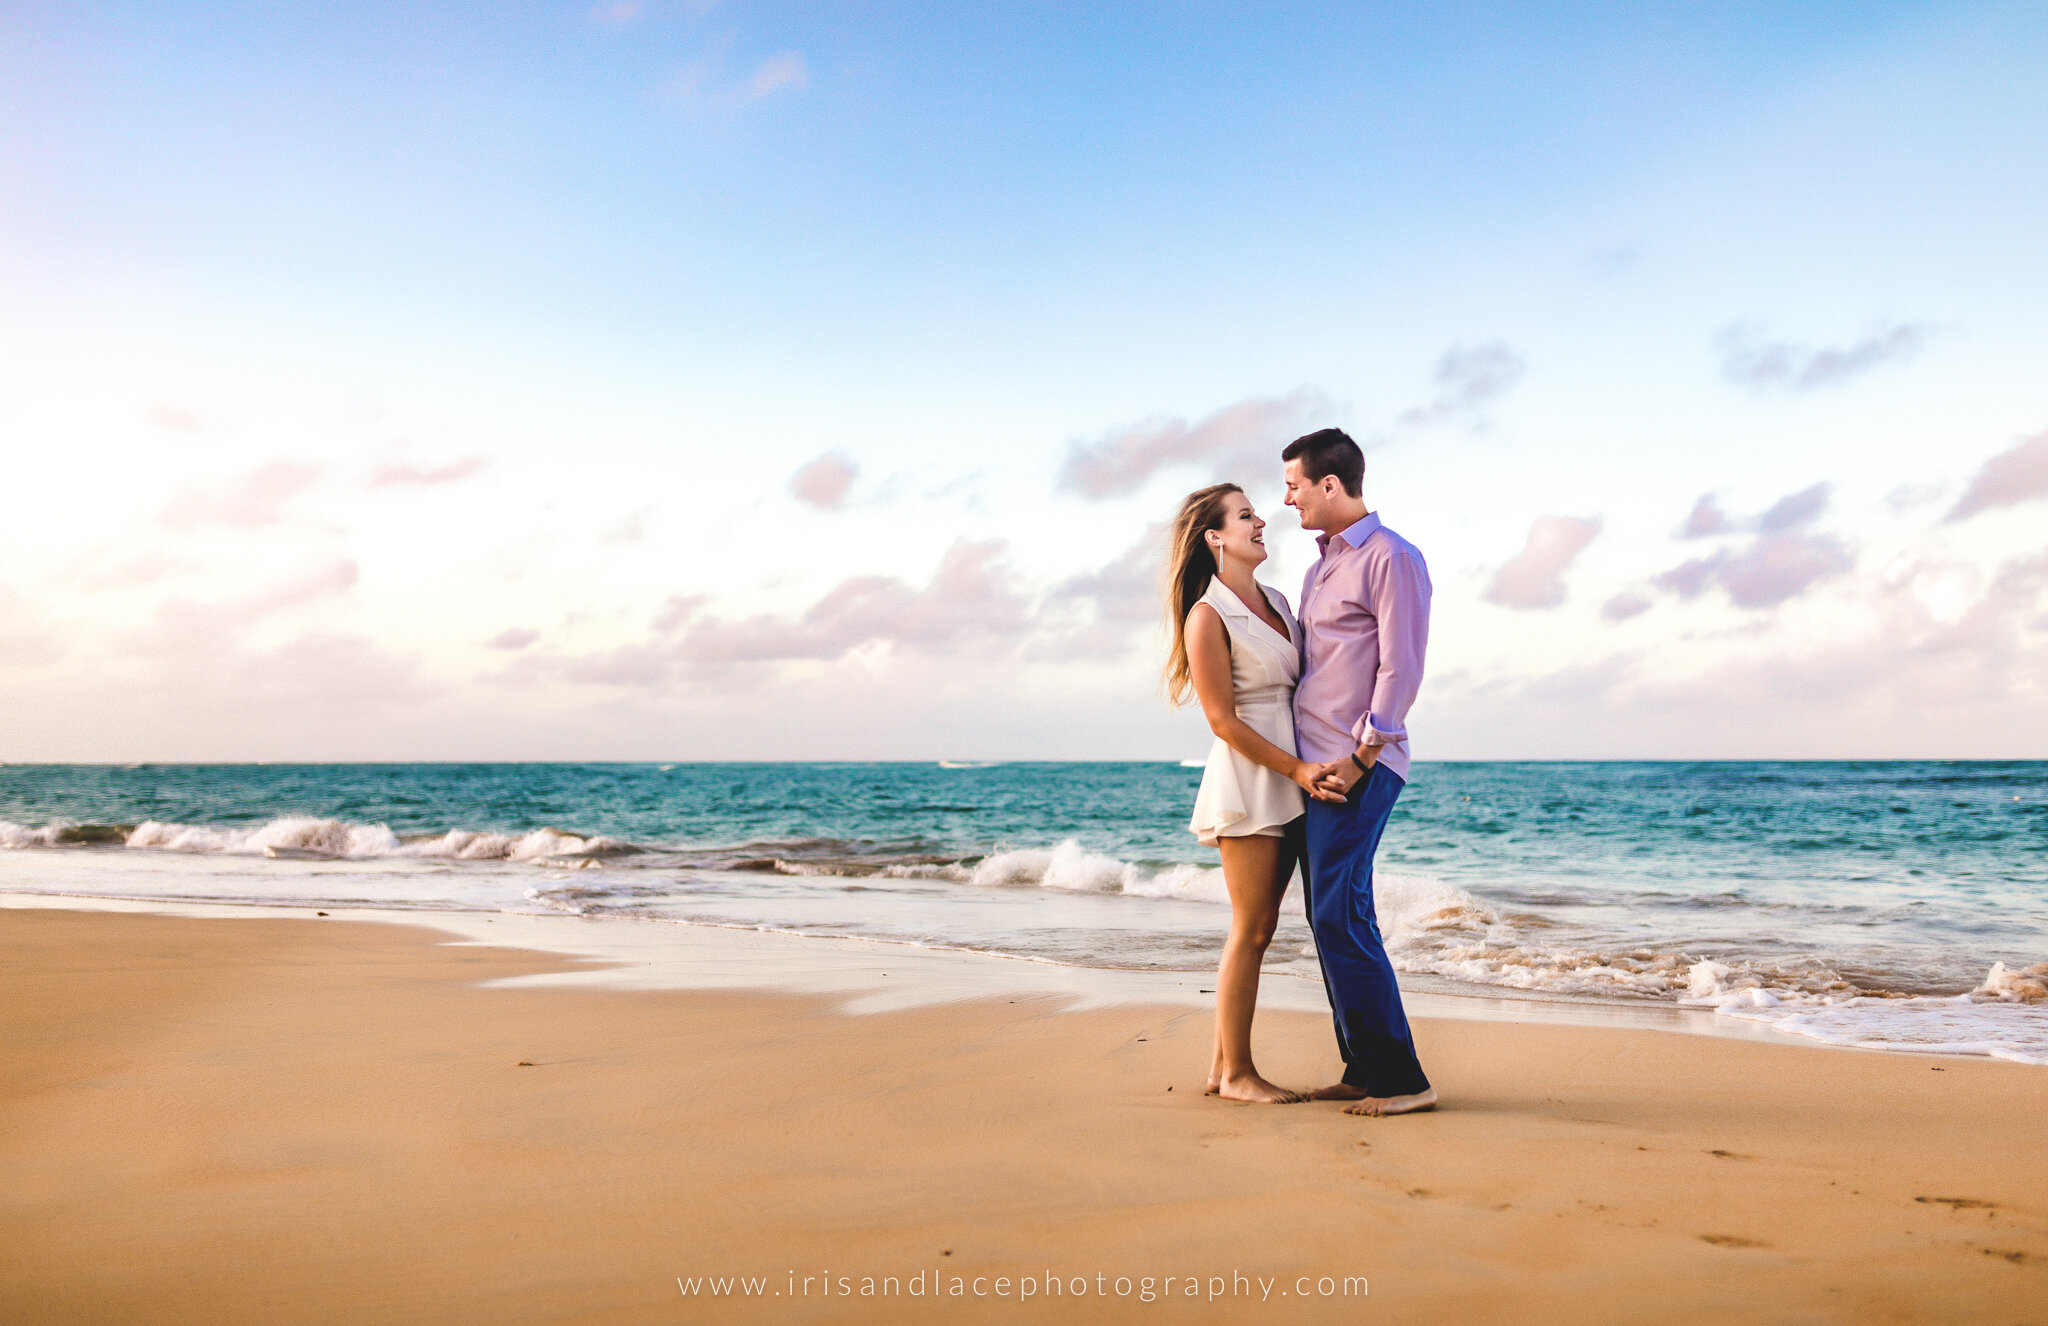 Travel and Adventure Engagement Photos  |  Iris and Lace Photography